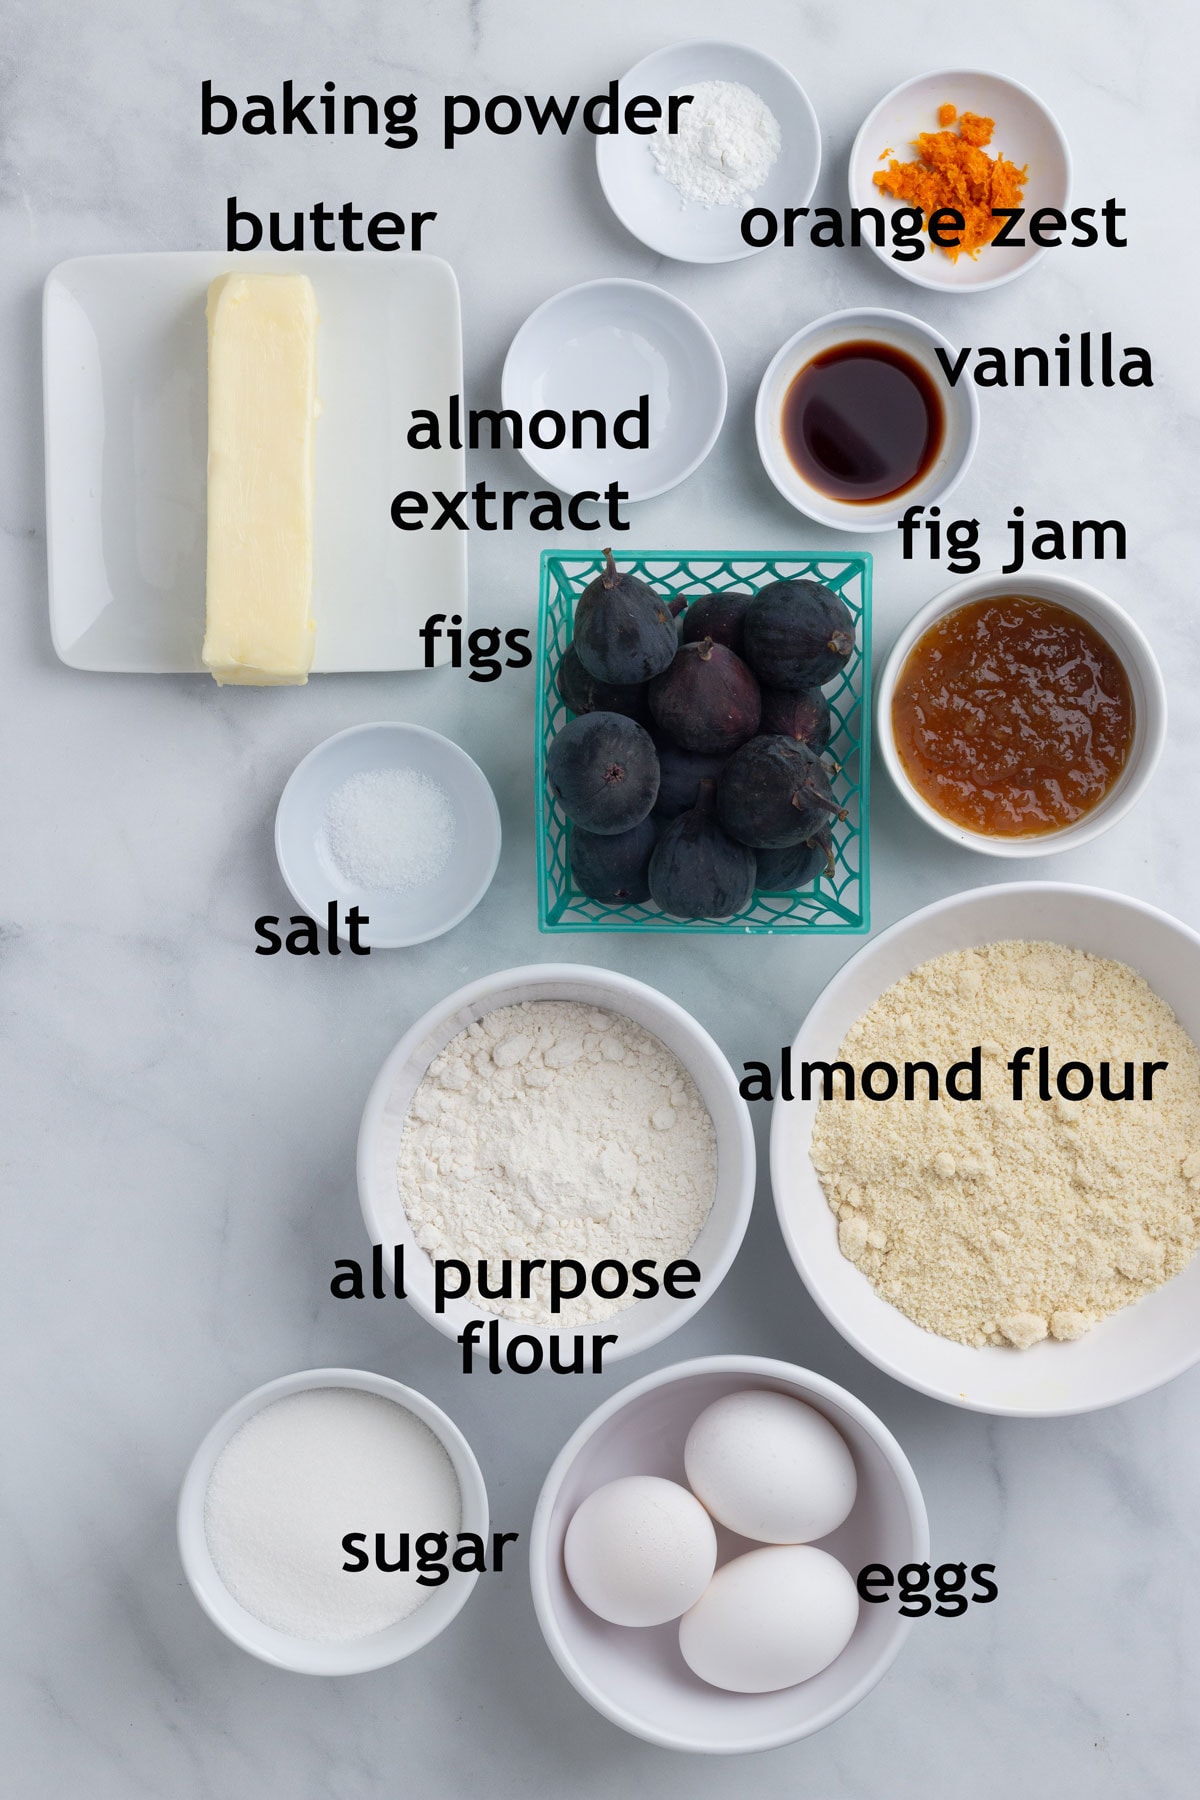 Ingredients with labels including butter, sugar, almond flour, figs, eggs and almond extract.